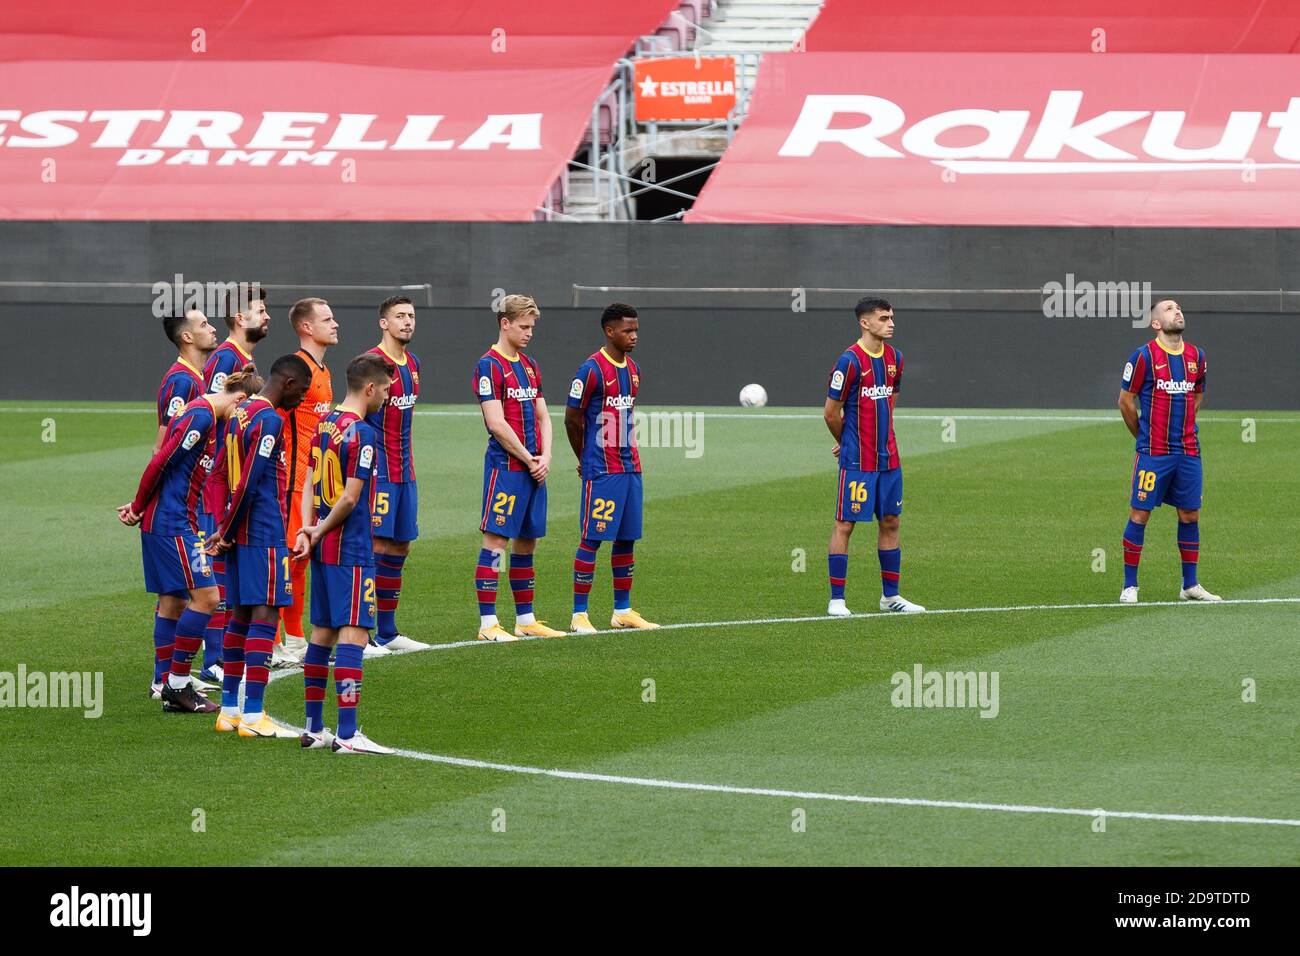 Barcelona, Spain. 07th Nov, 2020. Players of FC Barcelona during the Liga Santander match between FC Barcelona and Real Betis Balompie at Camp Nou in Barcelona, Spain. Credit: Dax Images/Alamy Live News Stock Photo